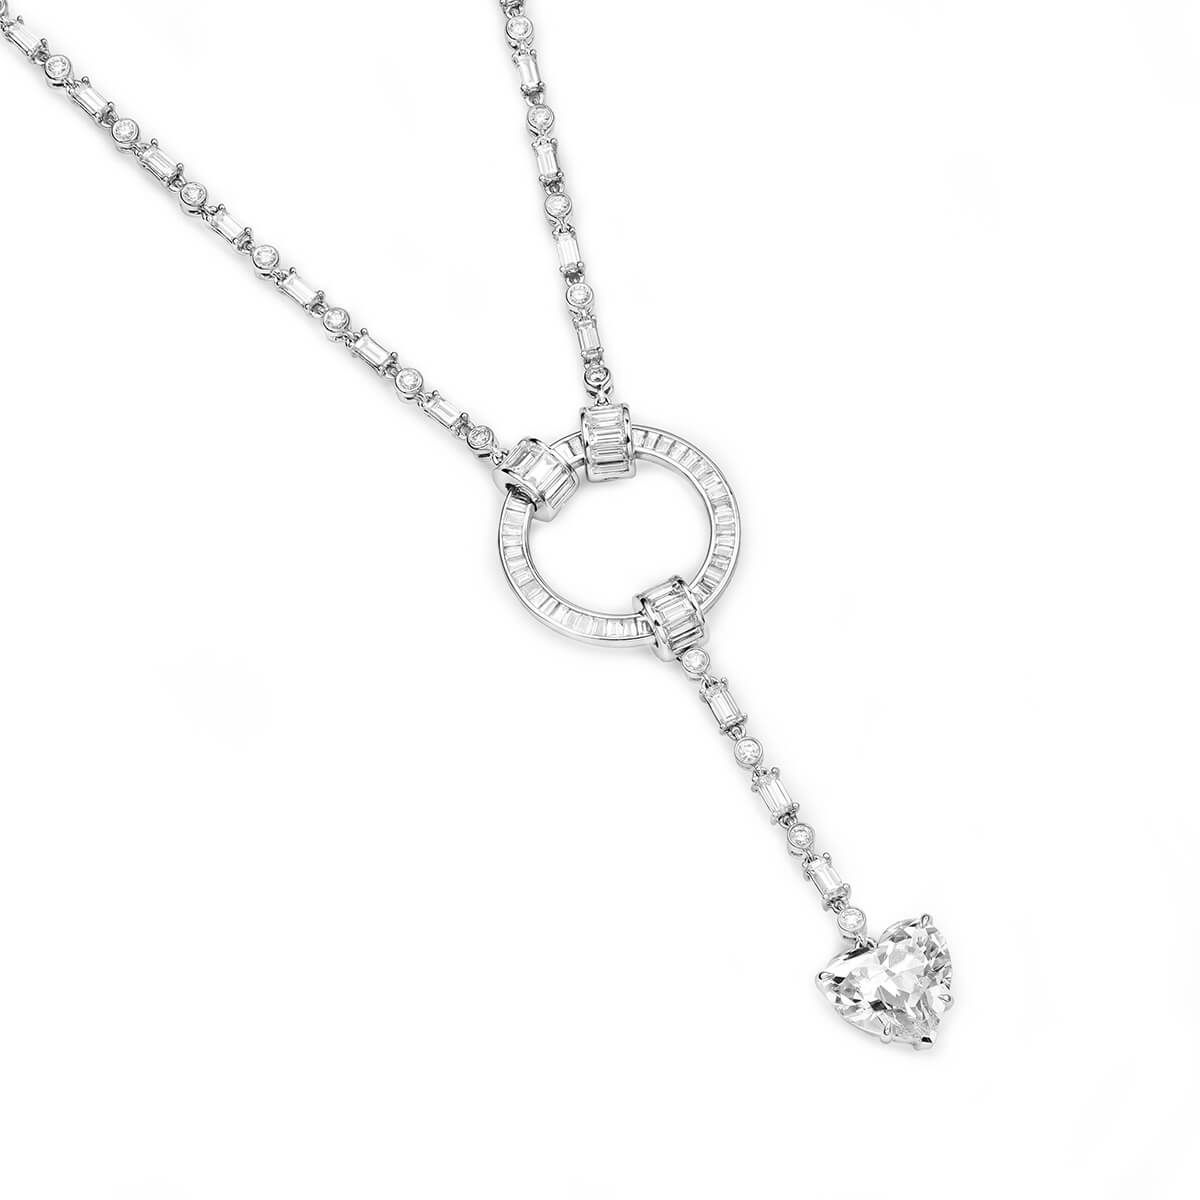  White Diamond Necklace, 5.03 Ct. (5.48 Ct. TW), Heart shape, GIA Certified, 2171445631